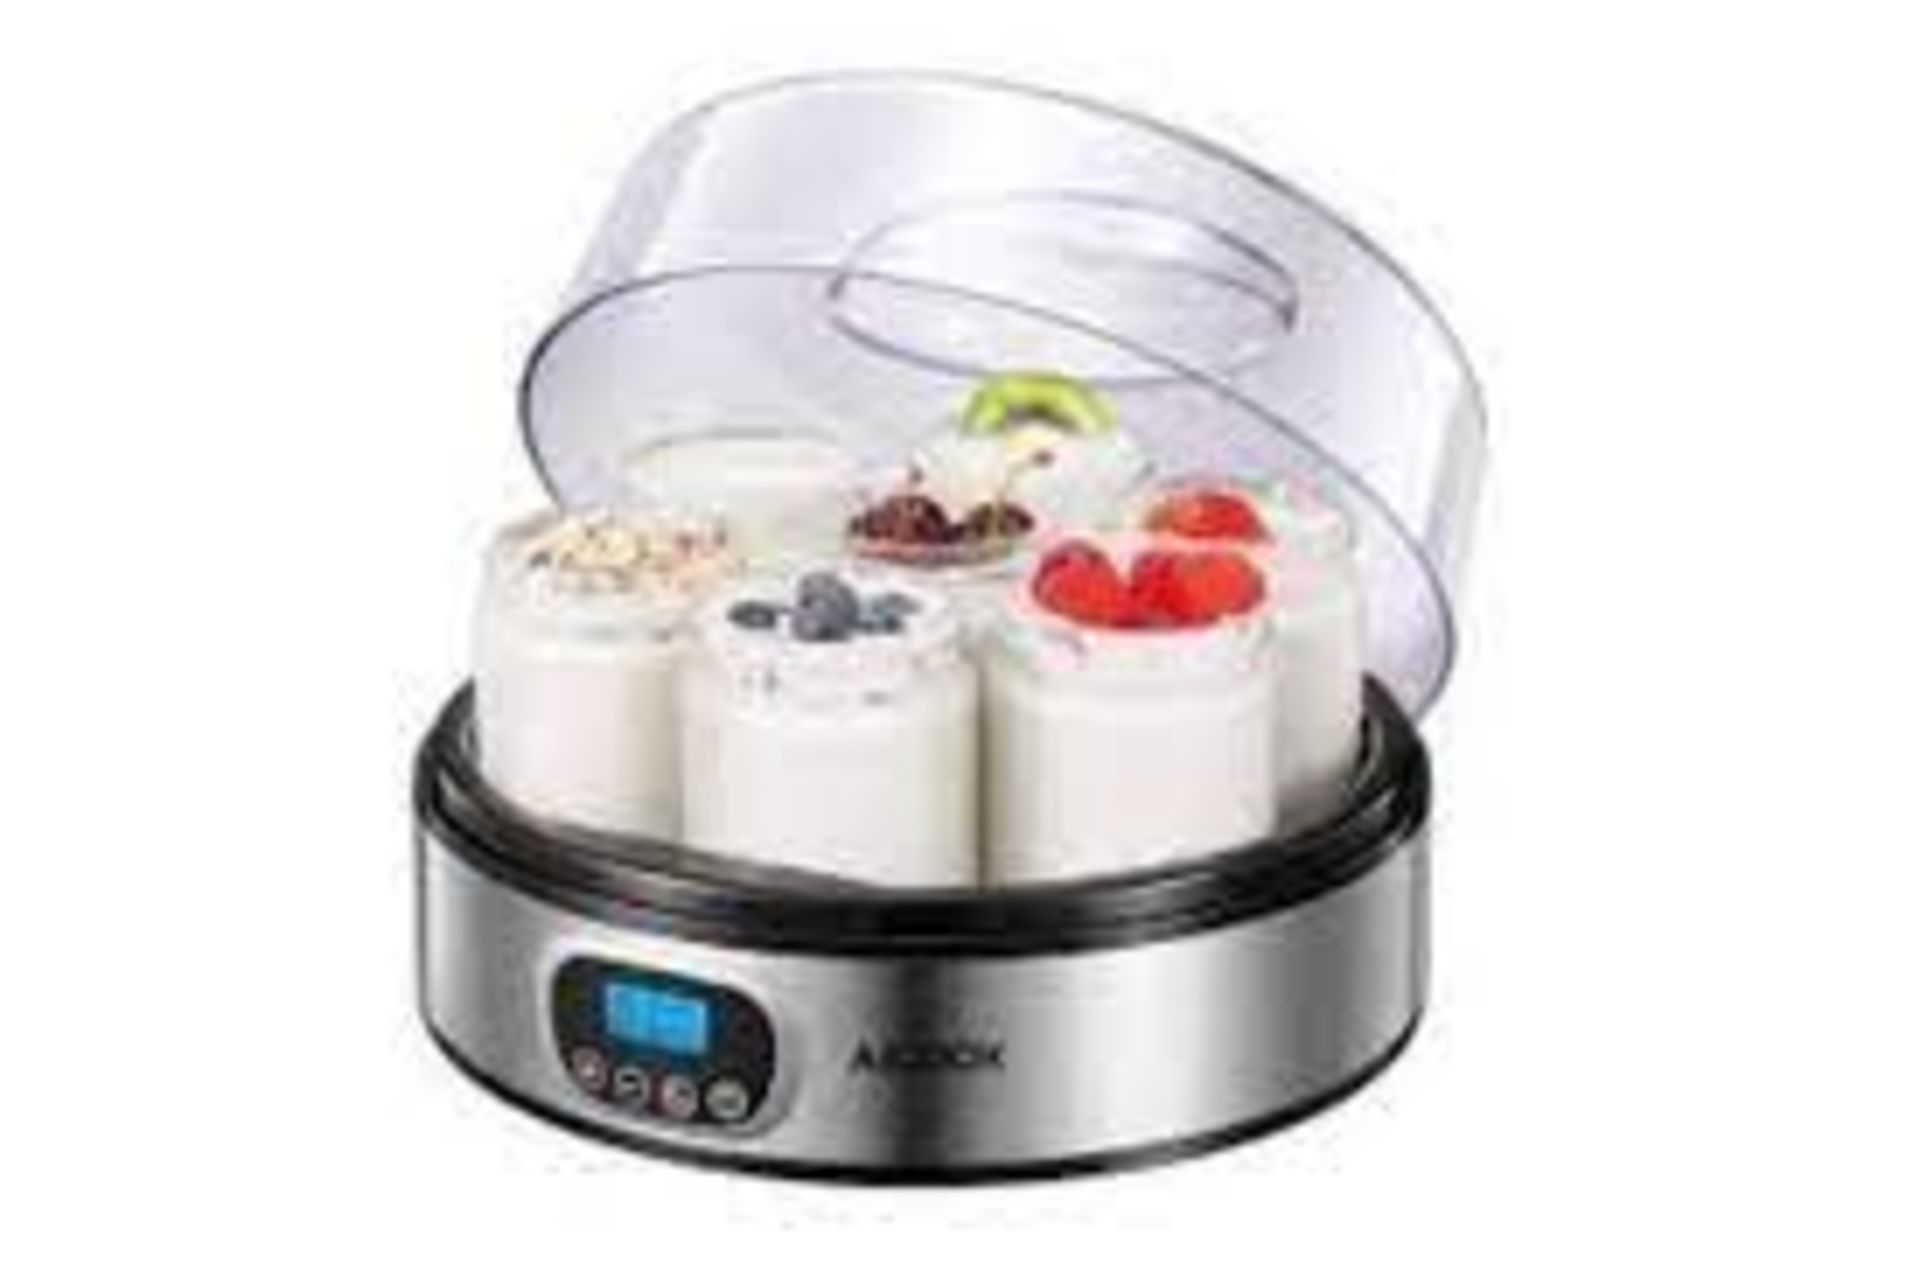 3 X NEW BOXED AICOOK Yoghurt Maker Machine with LCD Display and 8 x 180ml Glass Jars, Adjustable - Image 2 of 2